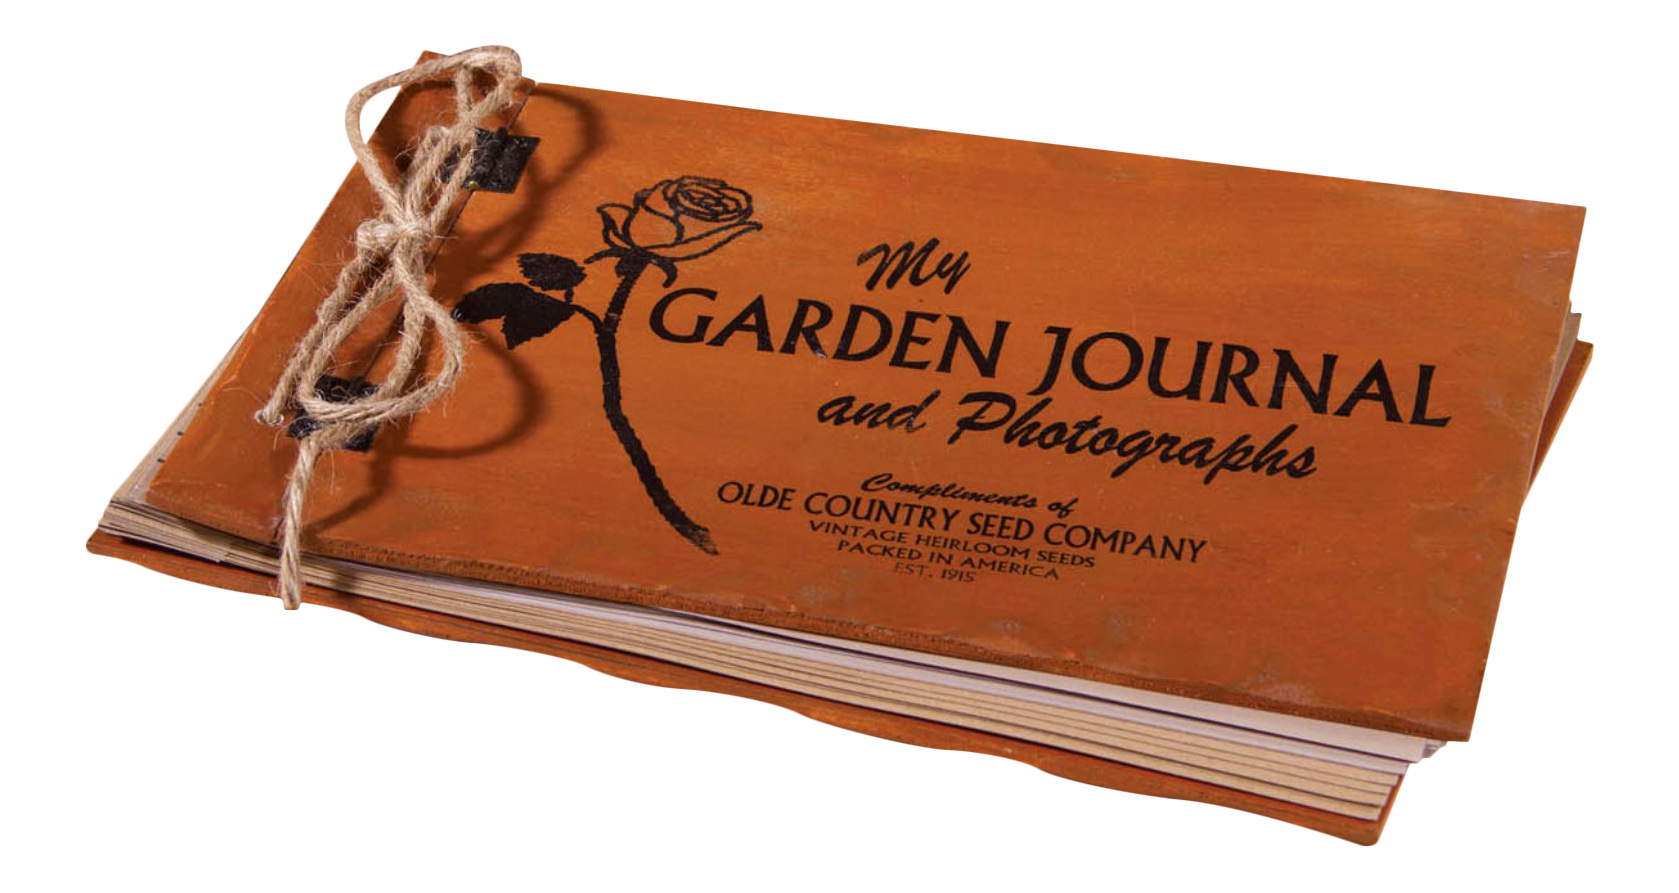 Ohio Wholesale Olde Country Seed Company Garden Journal Photo Album Vintage Look Wood Covers